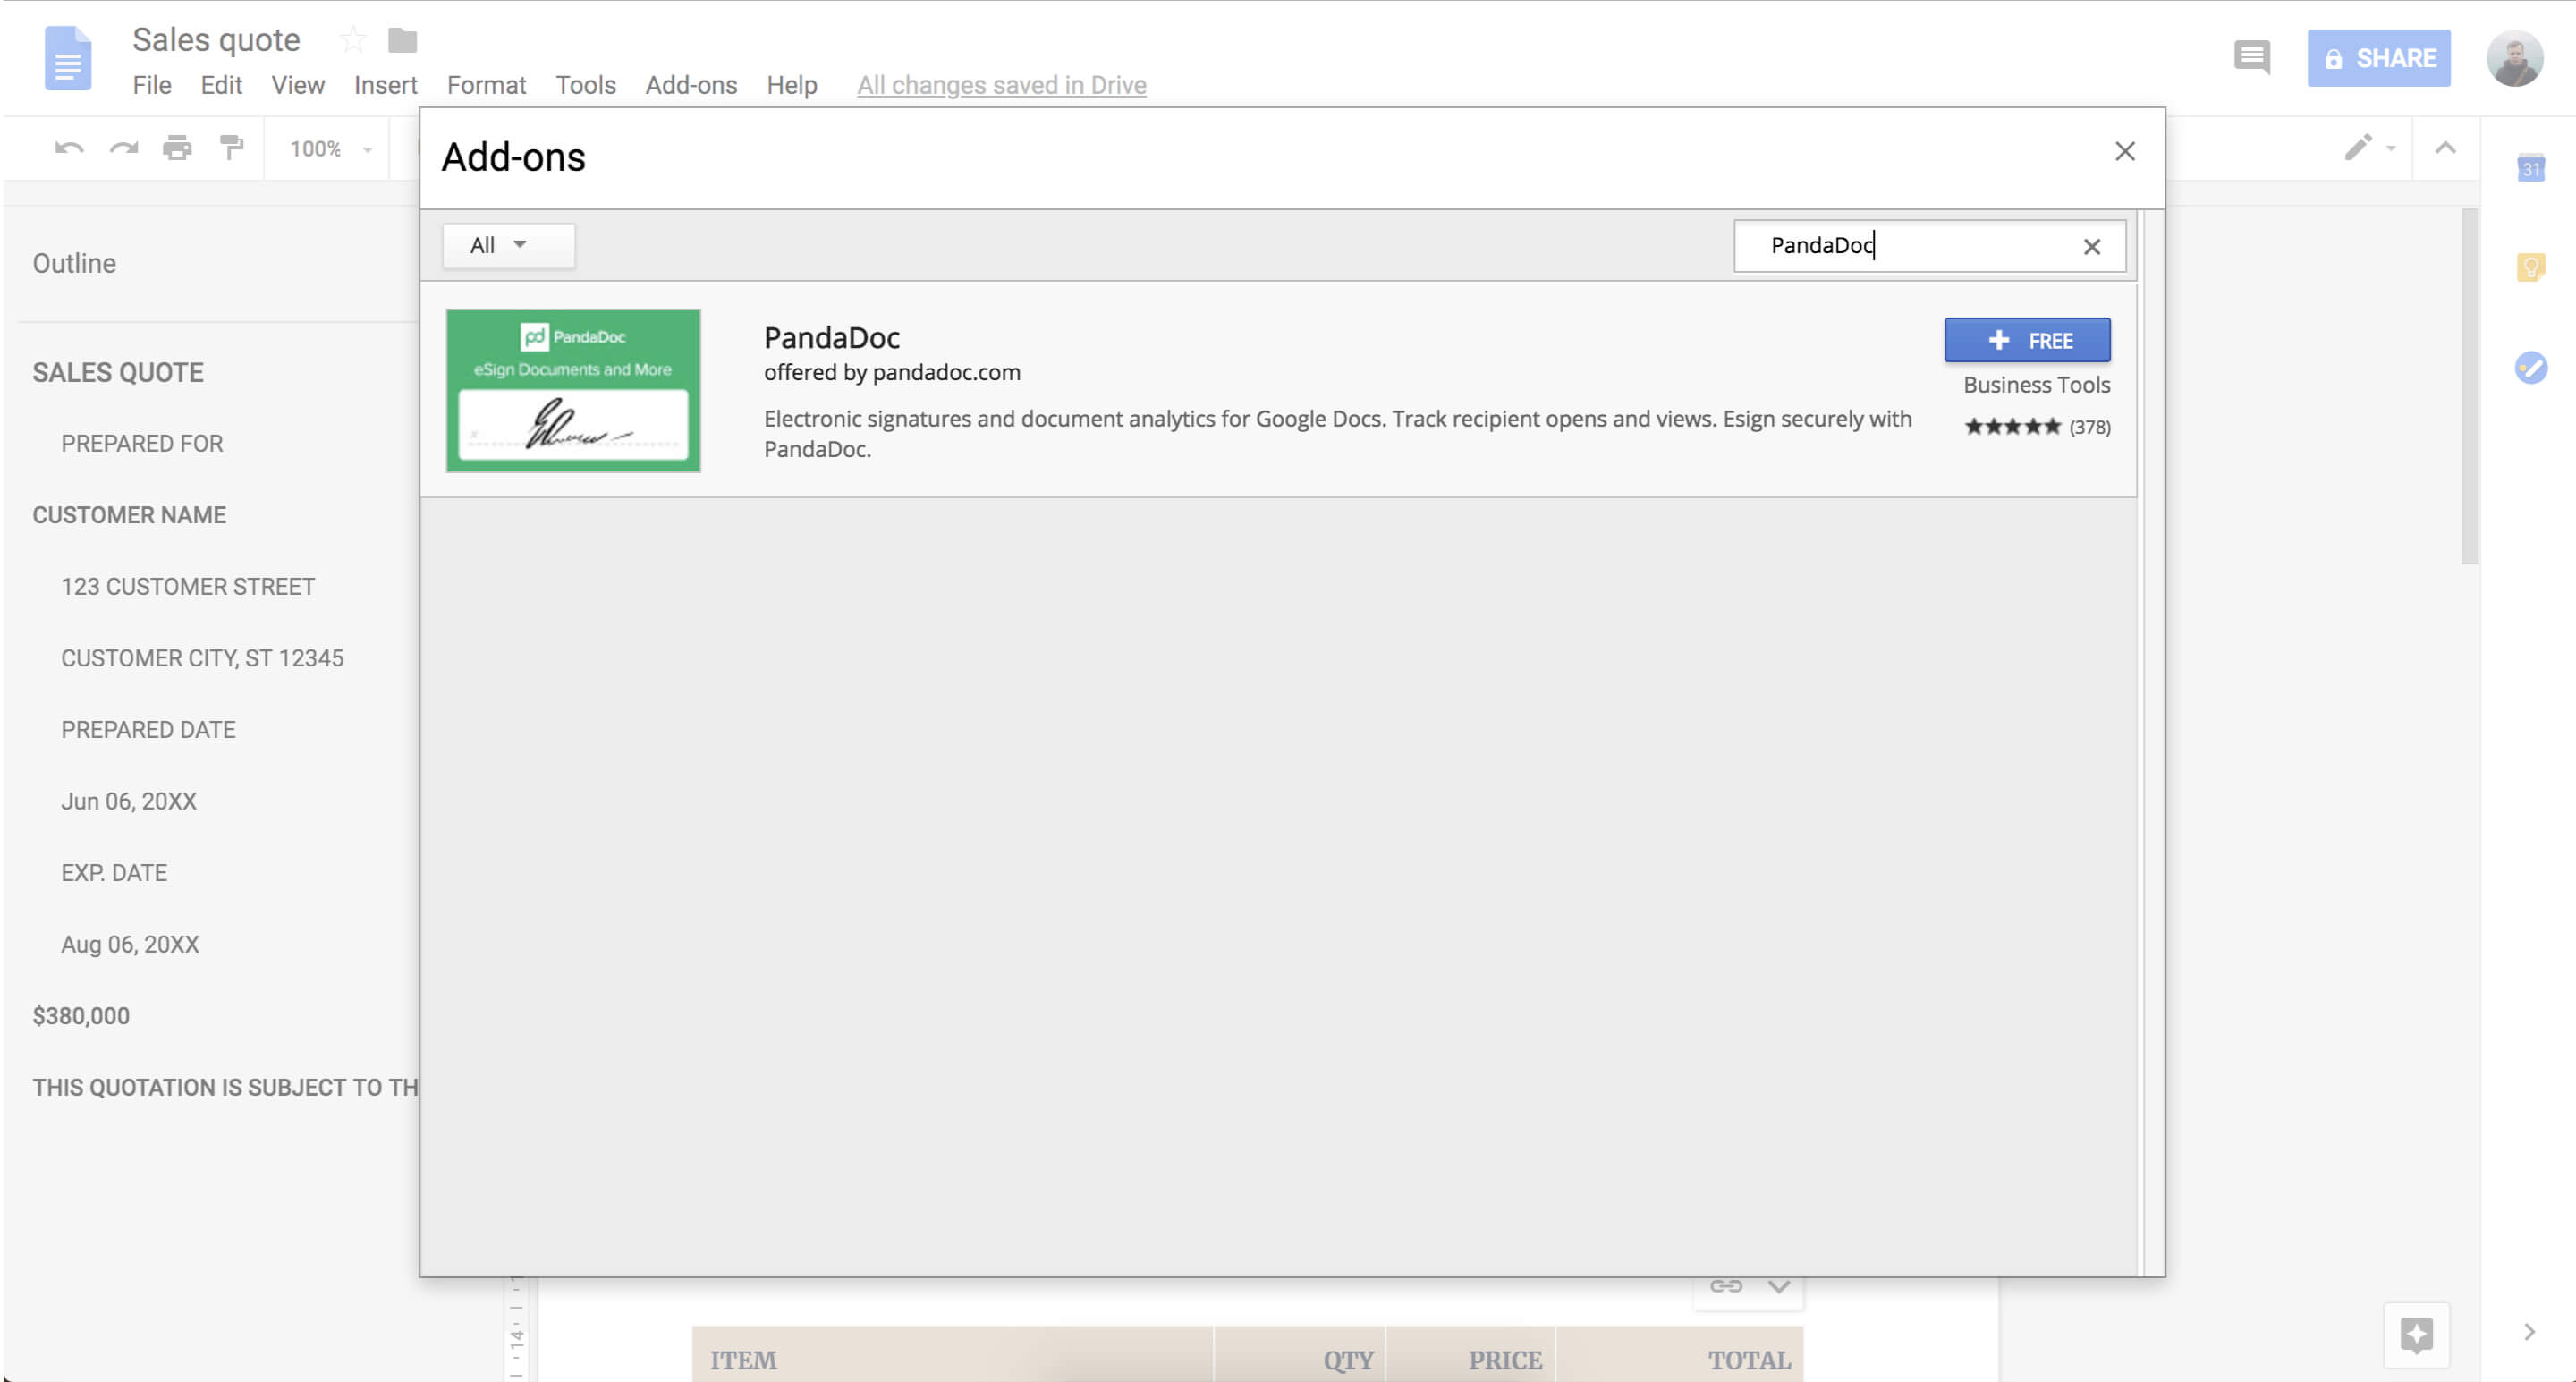 The PandaDoc Google Docs add-on makes it easy to add Google Doc signatures